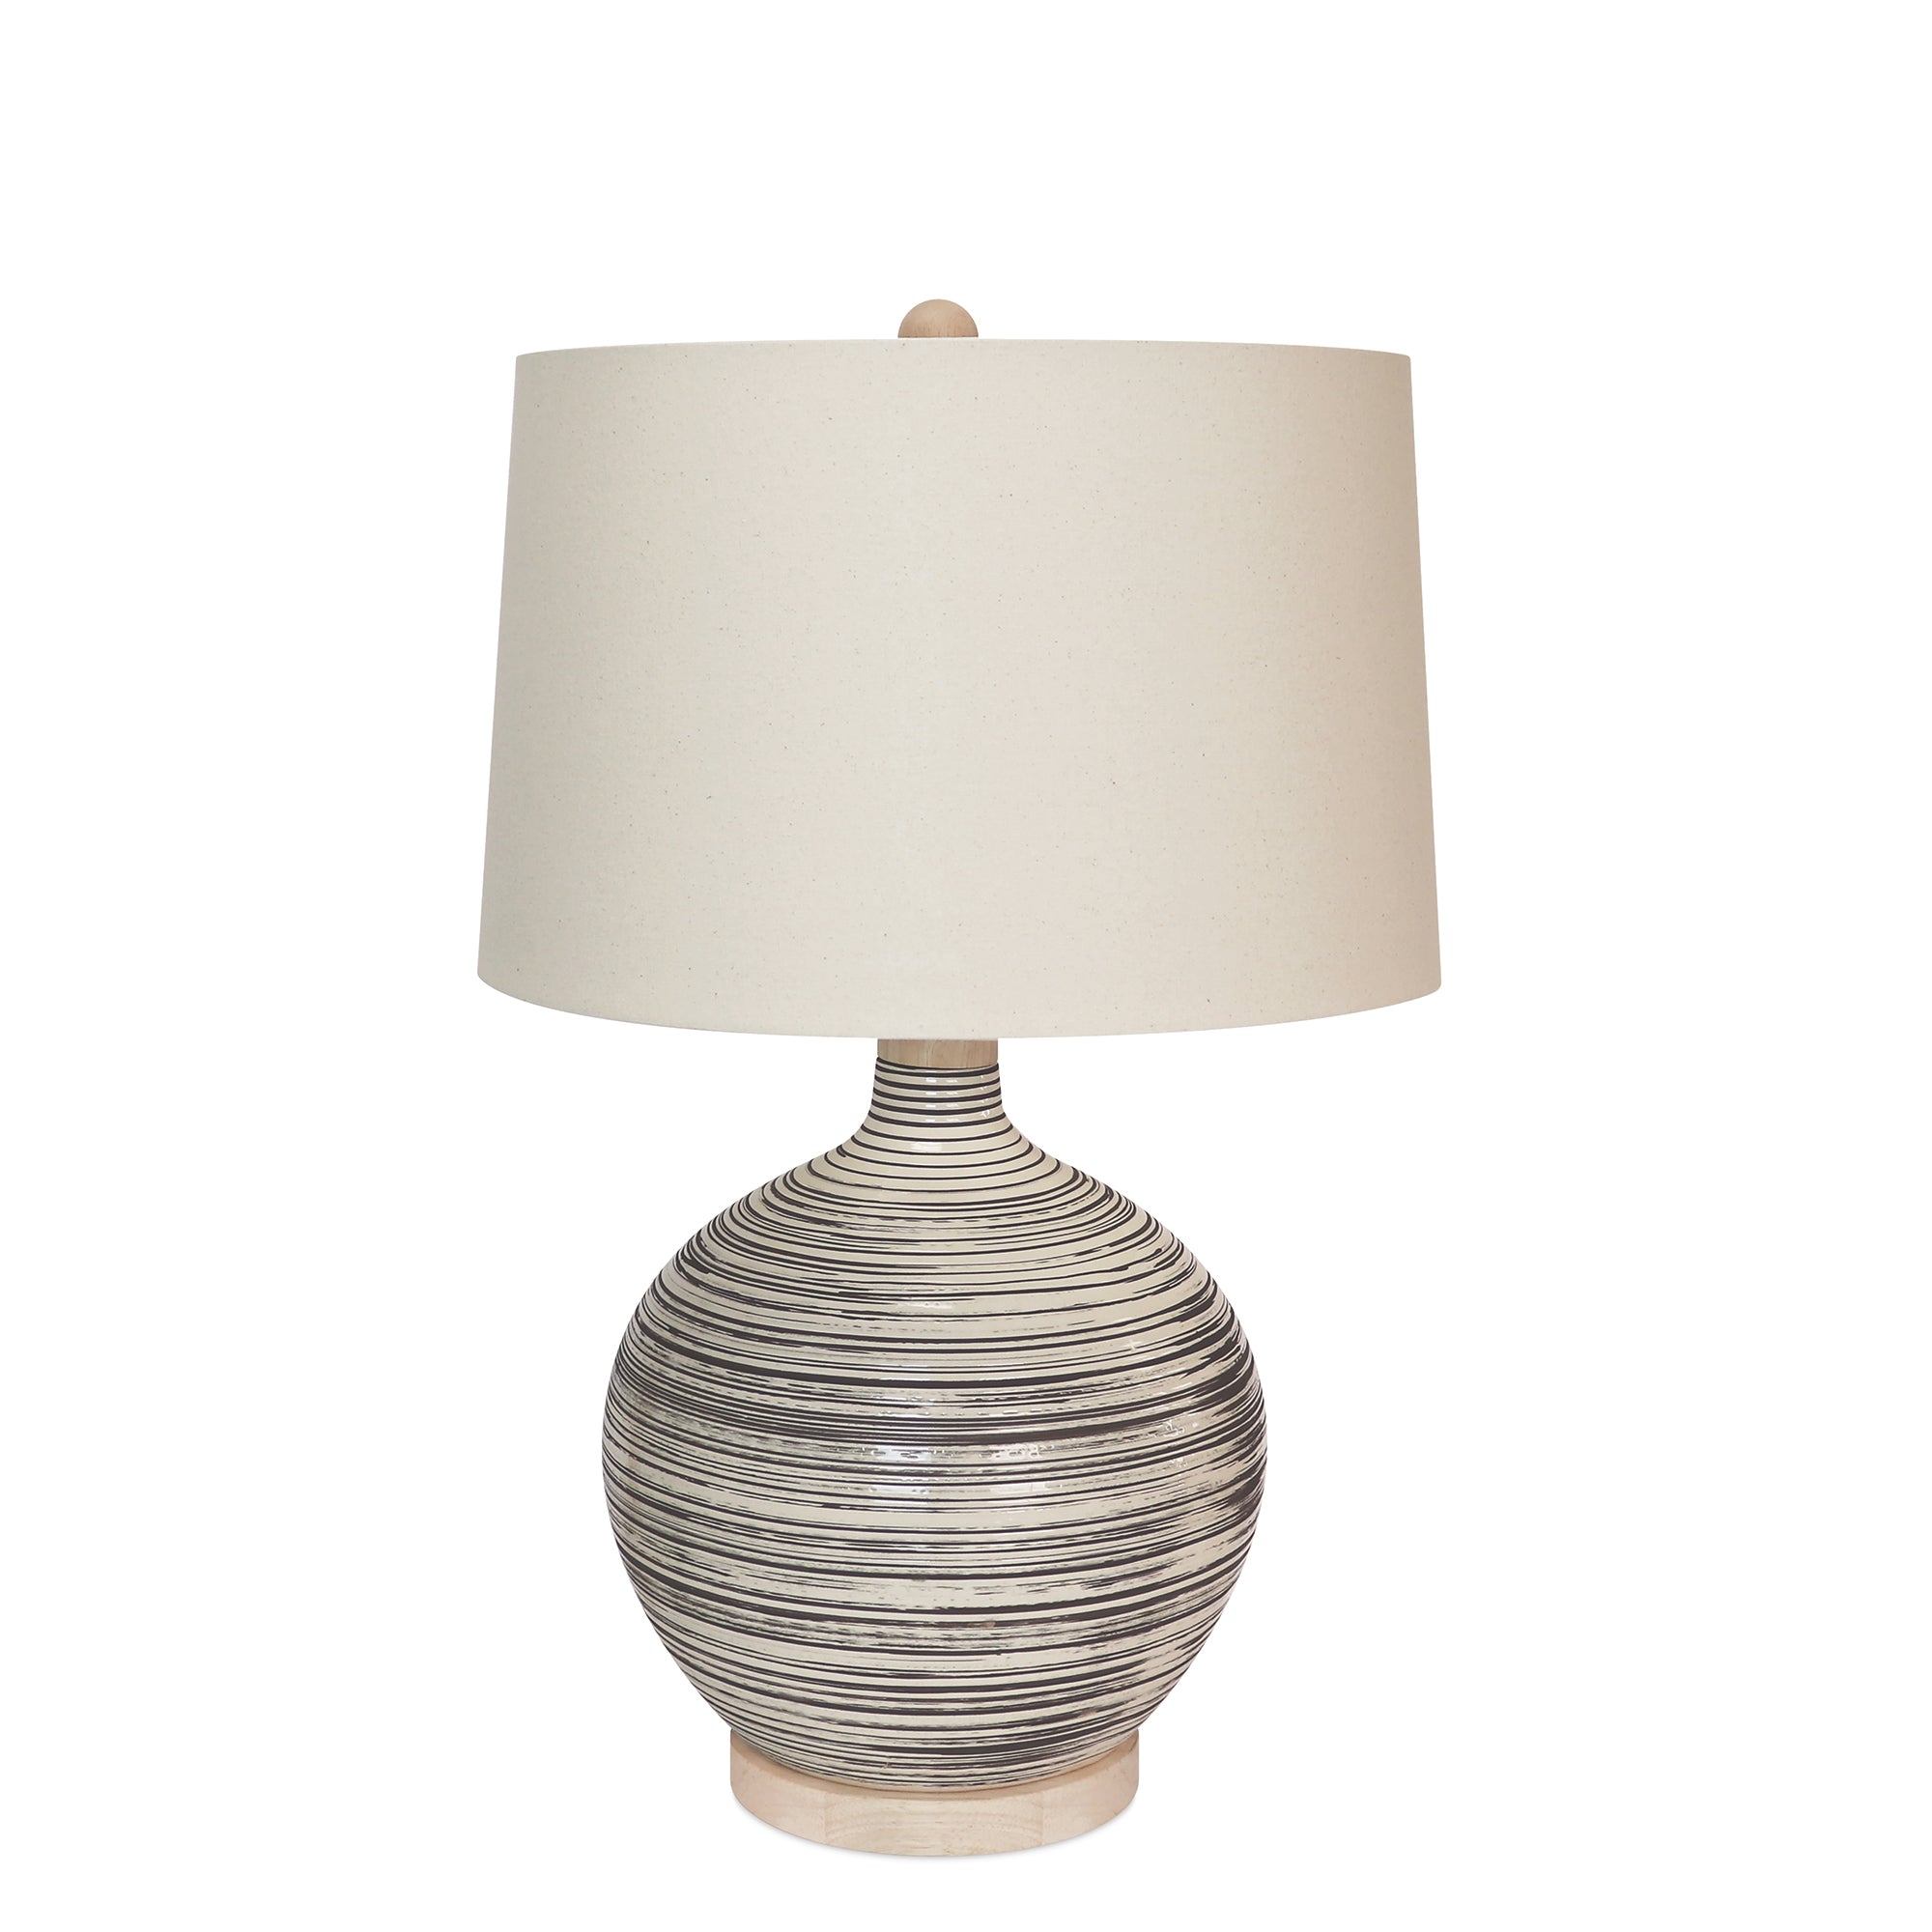 Alamont Table Lamp - Couture Lamps